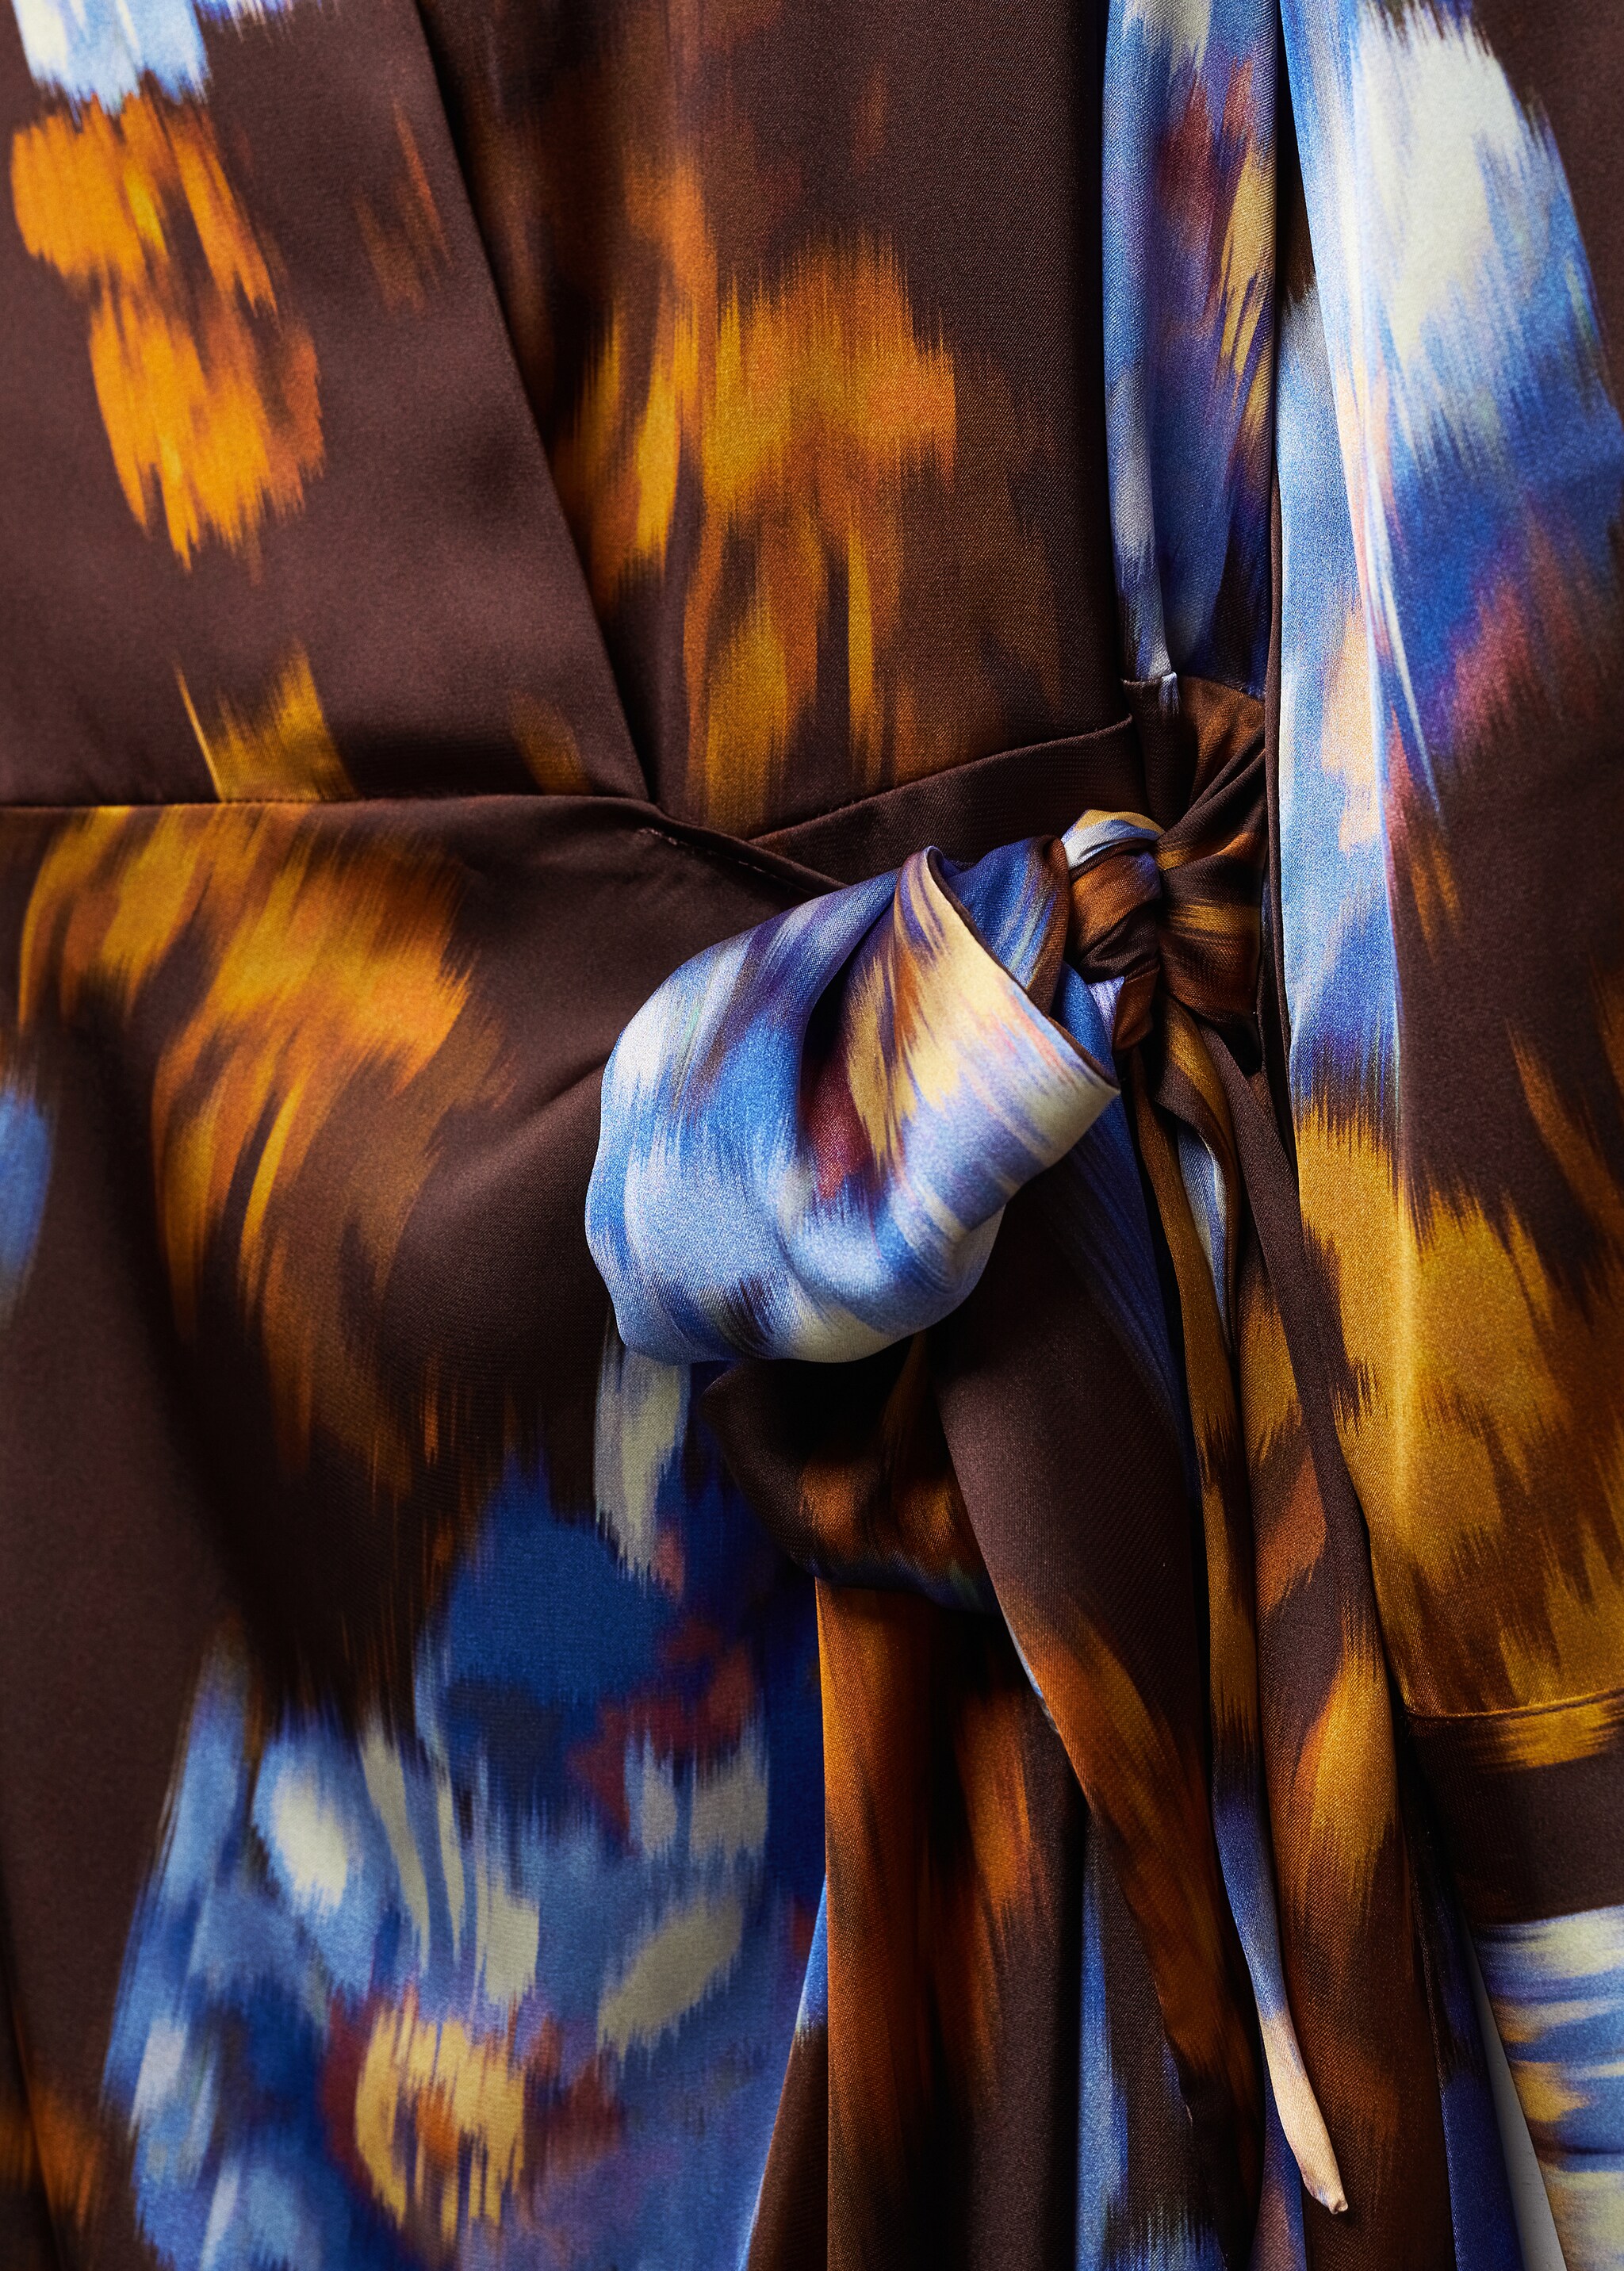 Printed satin dress - Details of the article 8